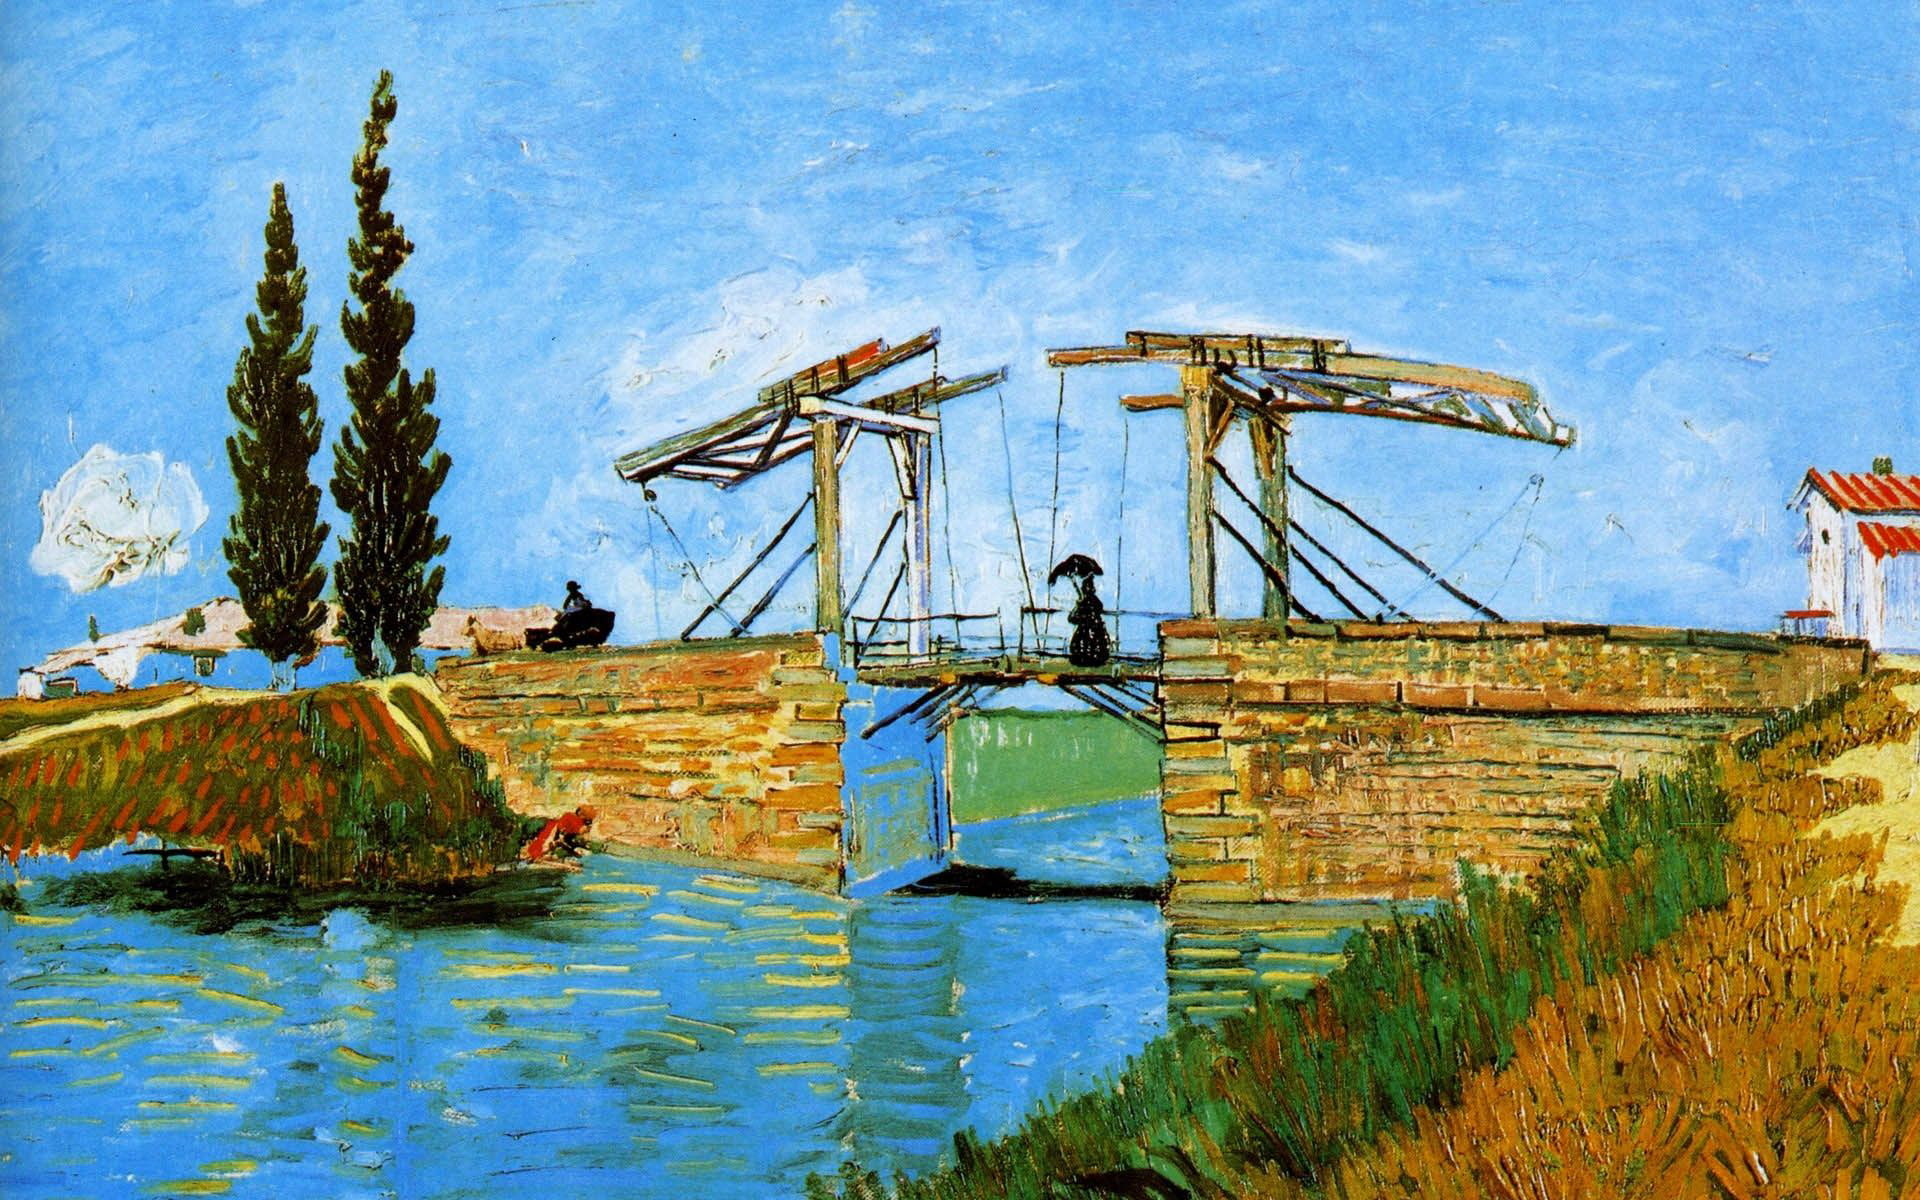 brown bridge painting, the sky, girl, trees, home, picture, channel